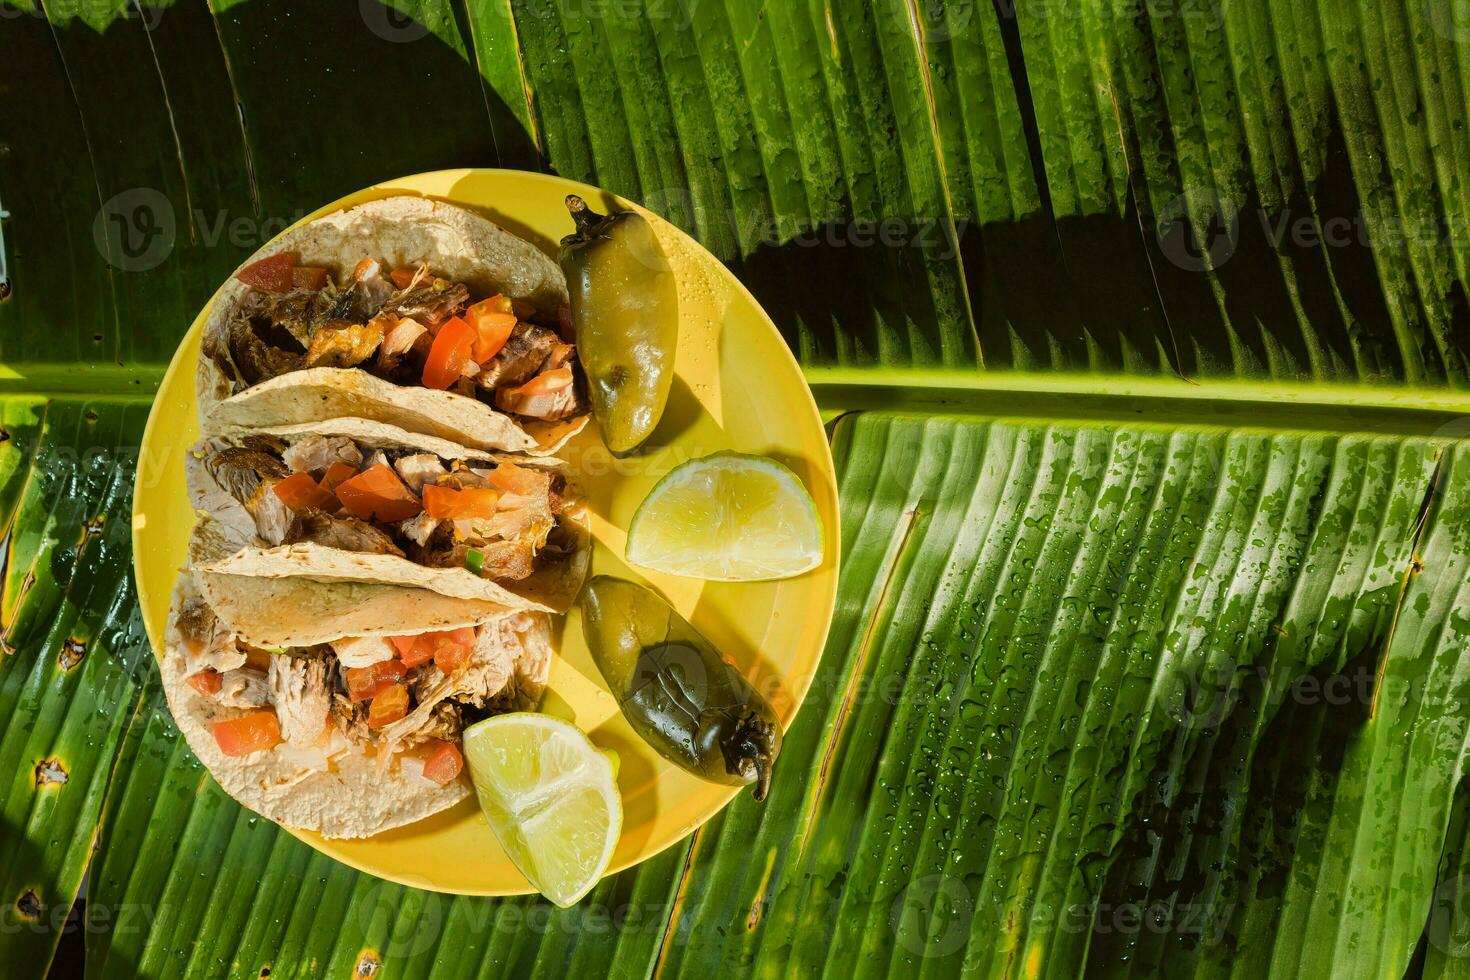 The Mexican carnitas tacos, topped with green ingredients, are a staple food in Mexican cuisine photo